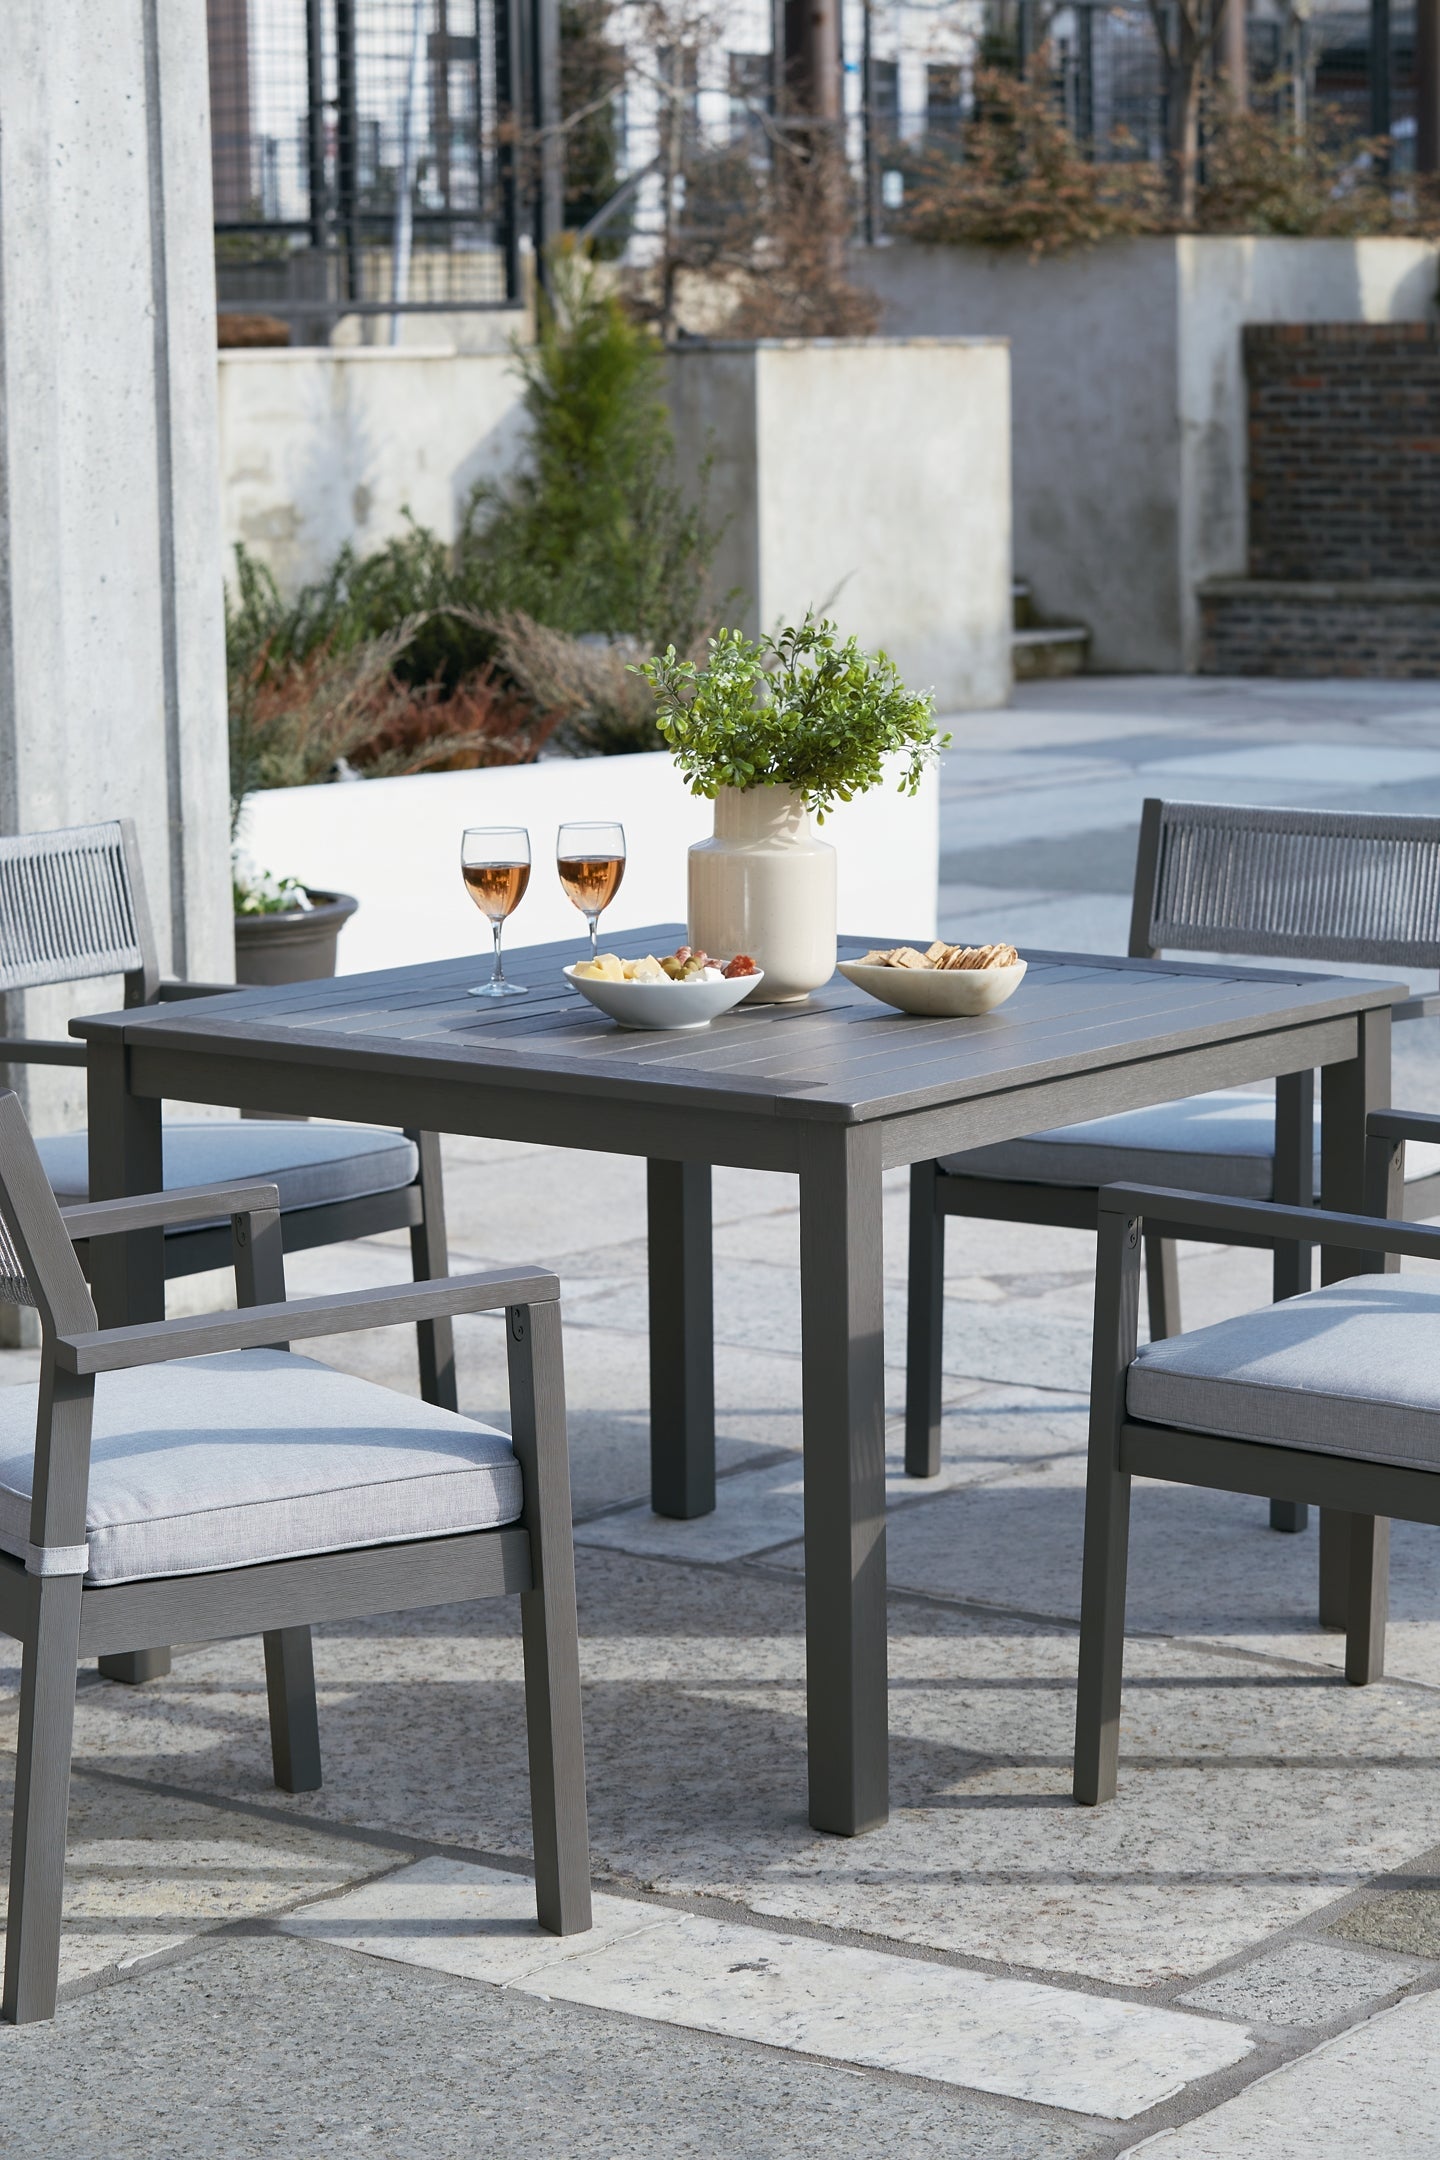 Eden Town Outdoor Dining Table and 4 Chairs at Cloud 9 Mattress & Furniture furniture, home furnishing, home decor